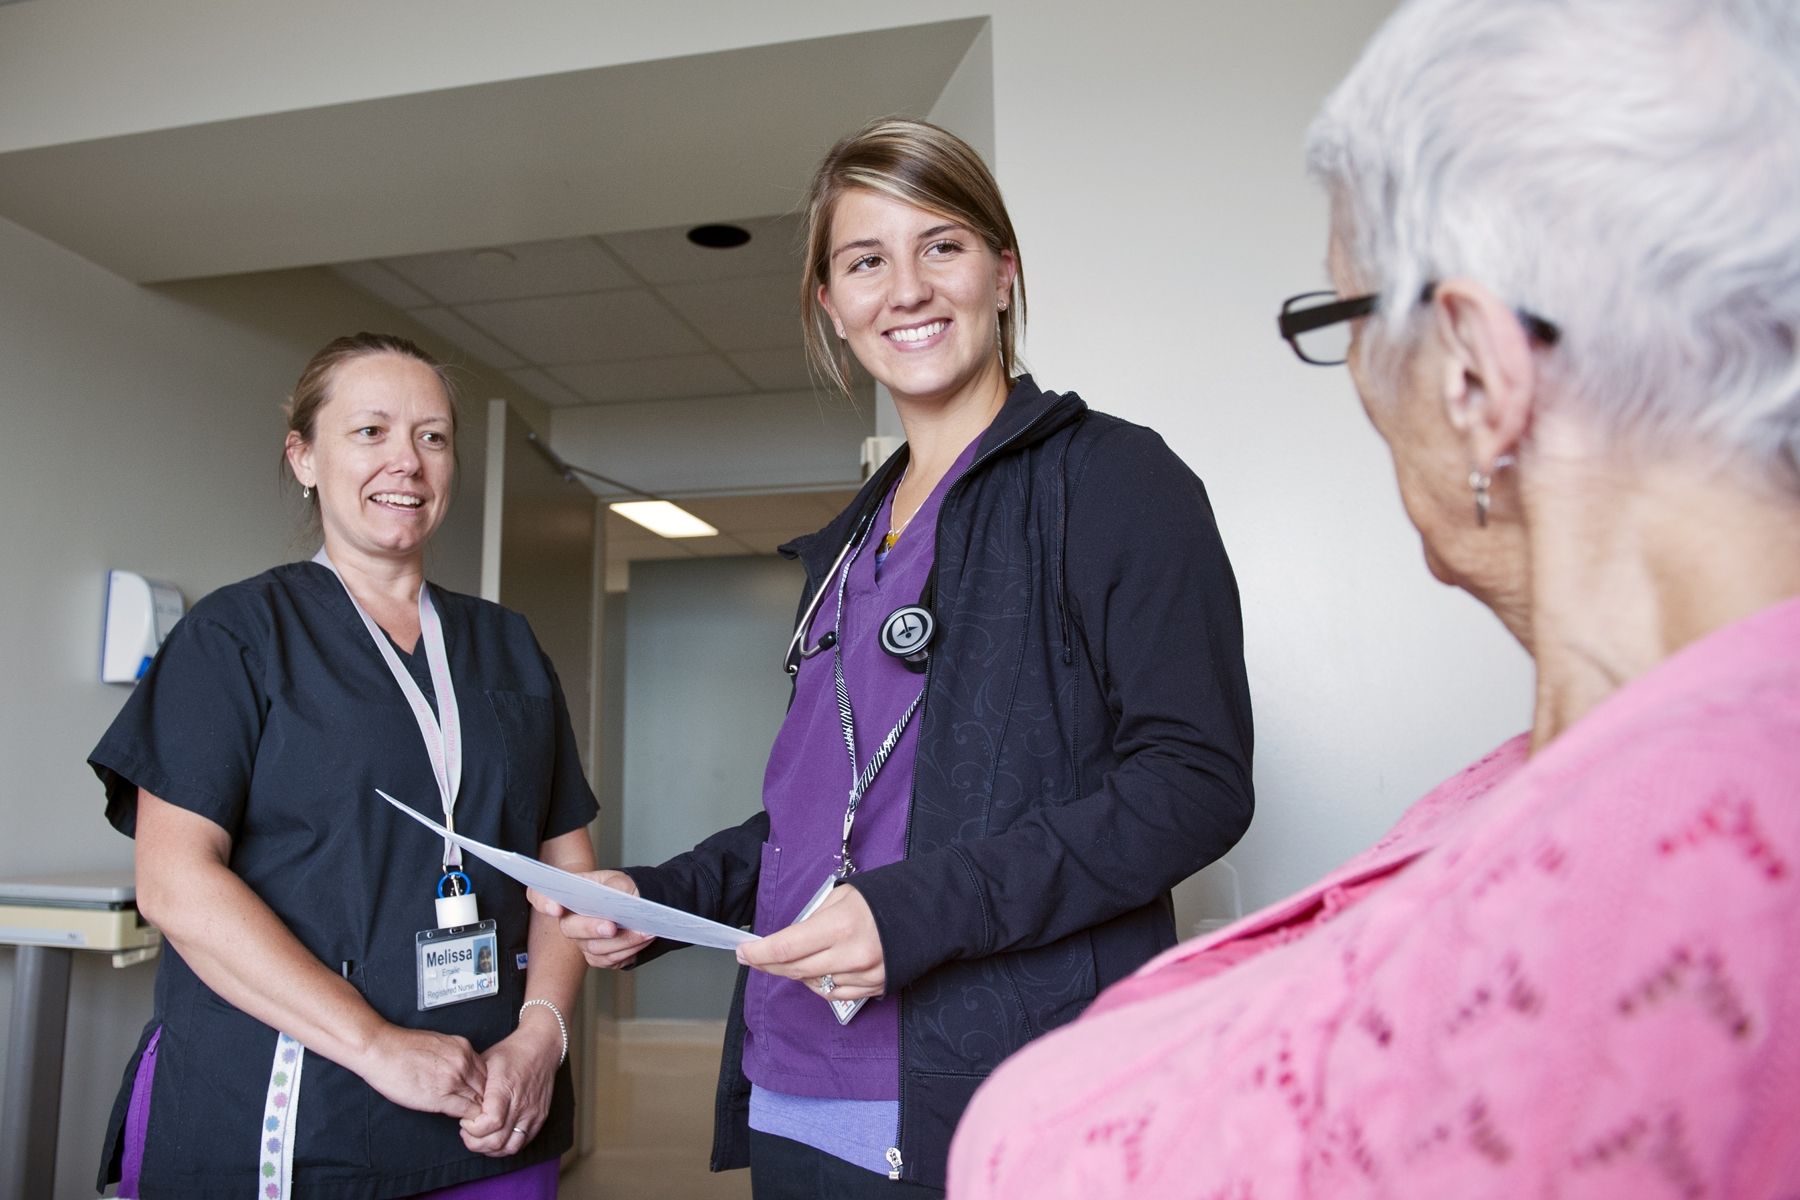 Bedside meetings bring our patients and nurses closer together